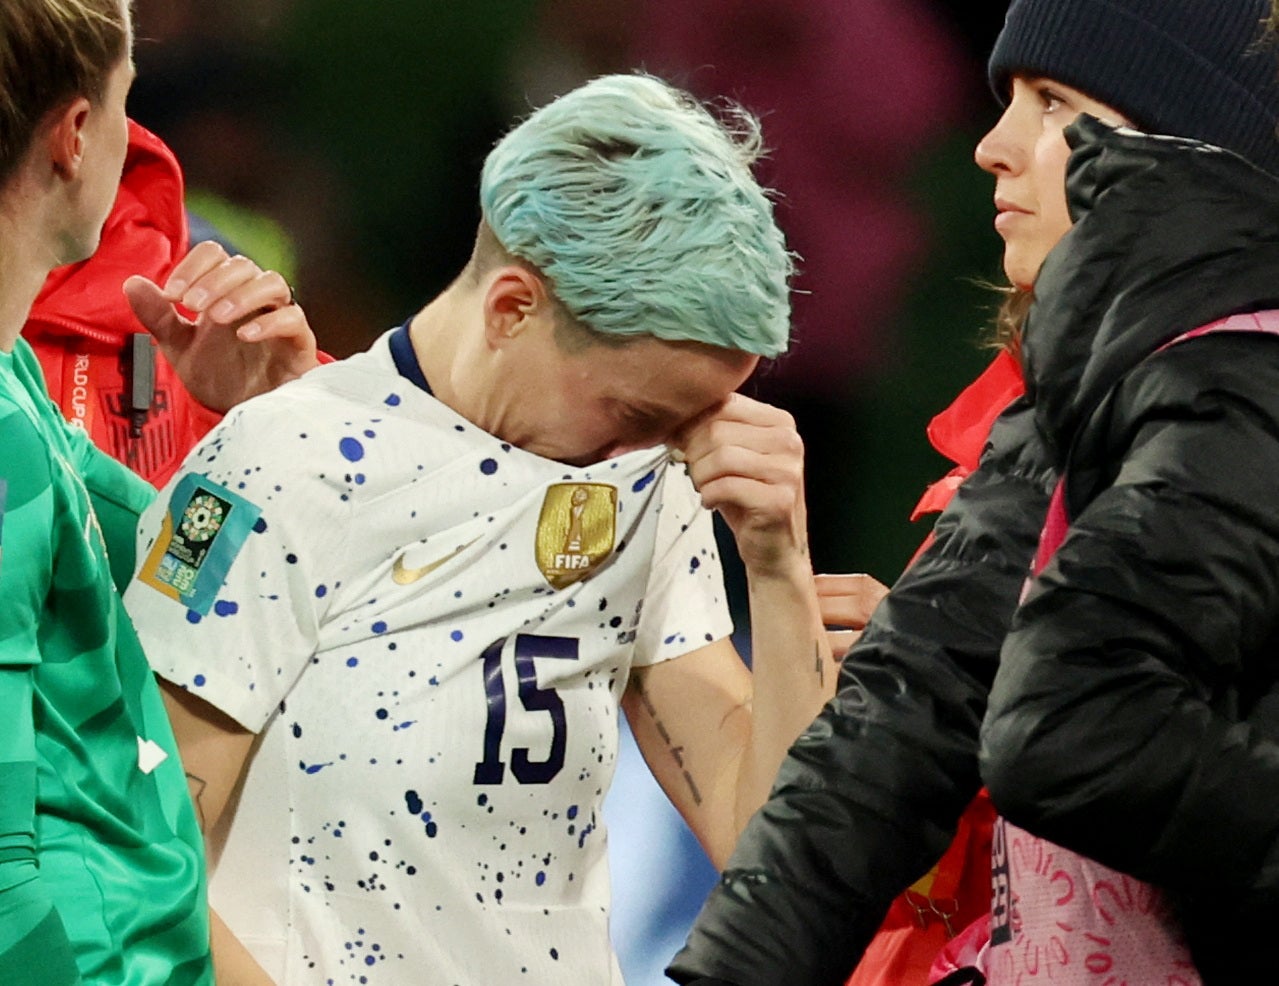 Rapinoe’s final kick at the World Cup was a missed penalty in the shoot-out